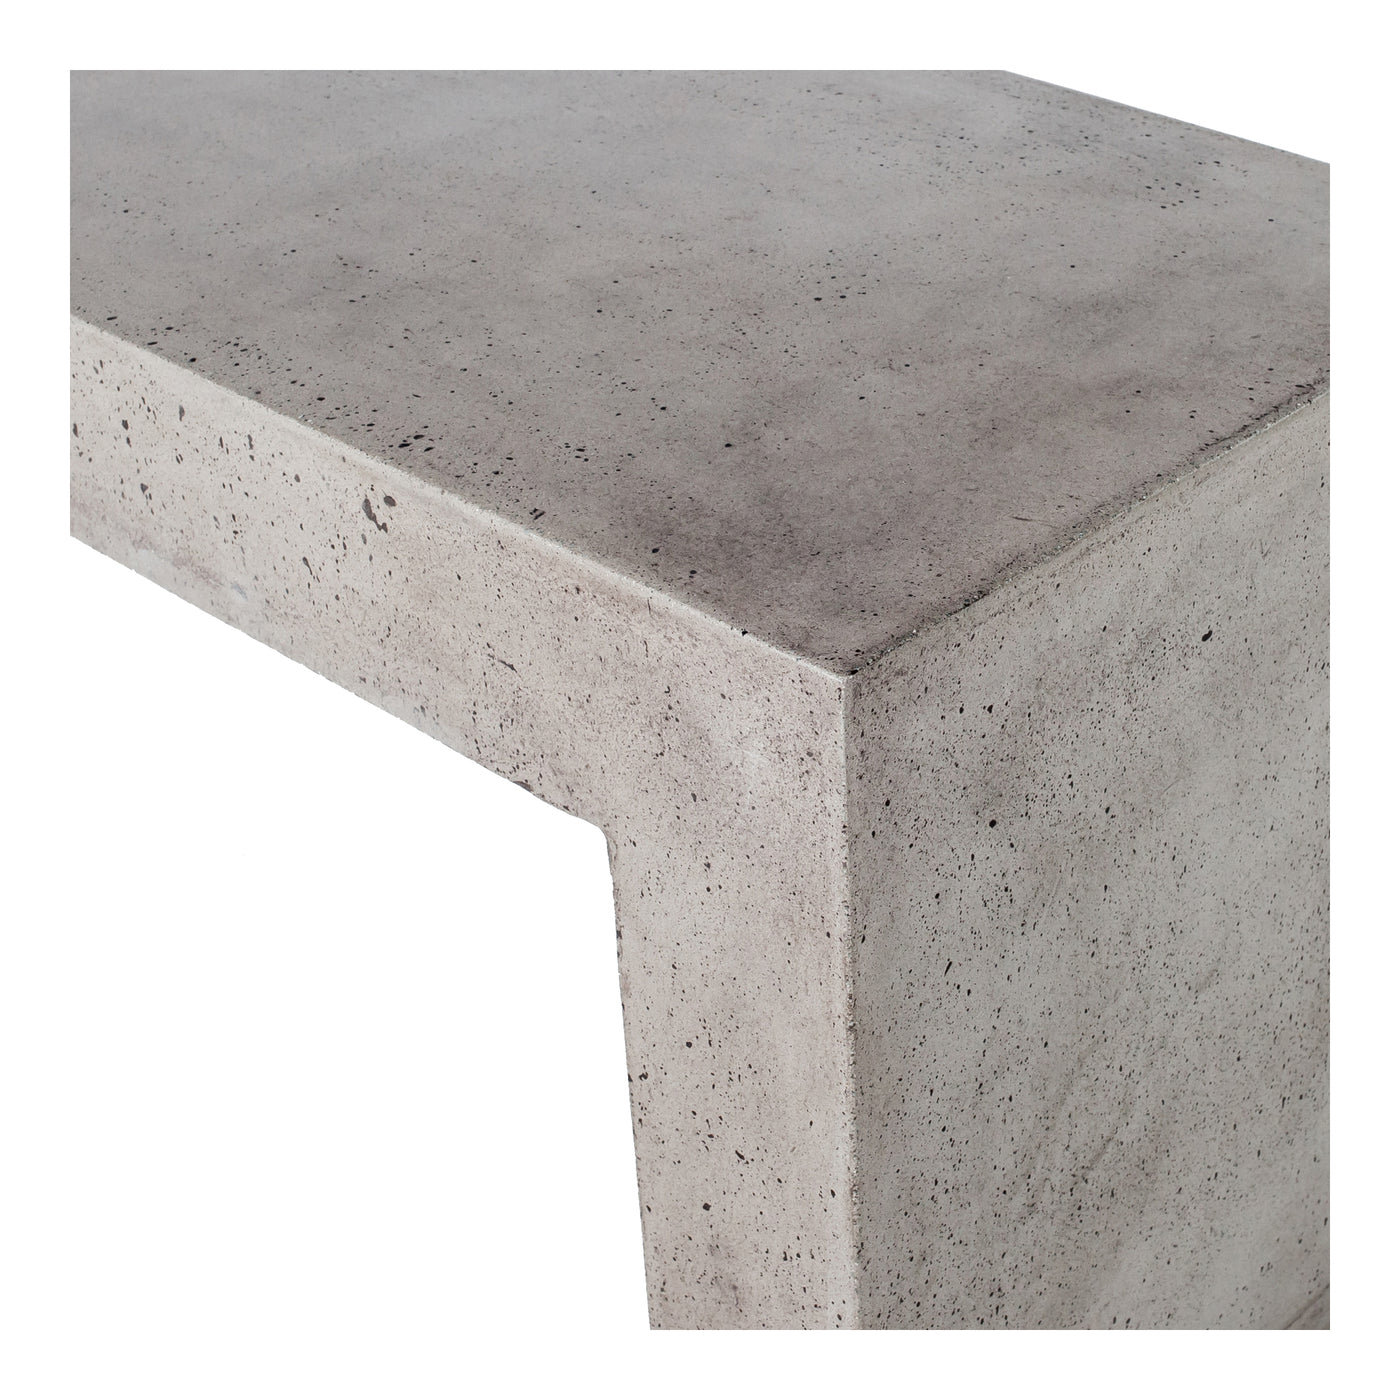 Cool, composed, concrete. The Lazarus bench suits indoor interiors as much as sitting it out on the patio in the summer sh...